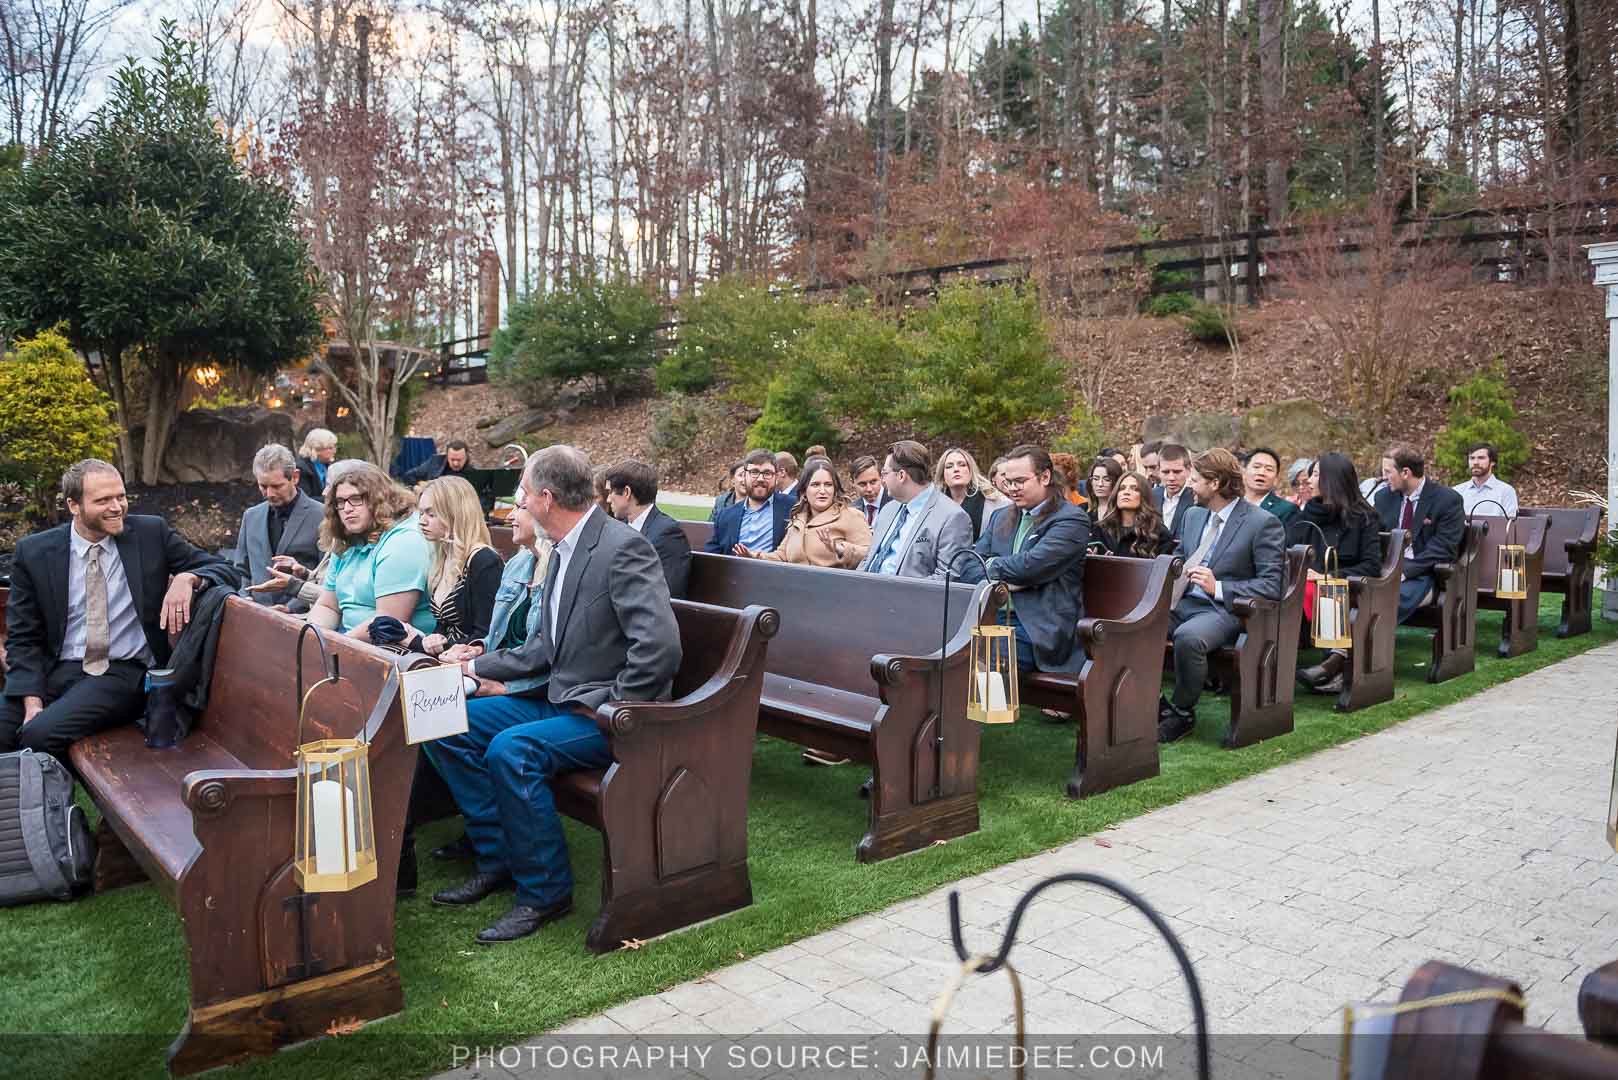 Rocky's Lake Estate Wedding Venue - Wedding ceremony - guests seated in outdoor pew benches